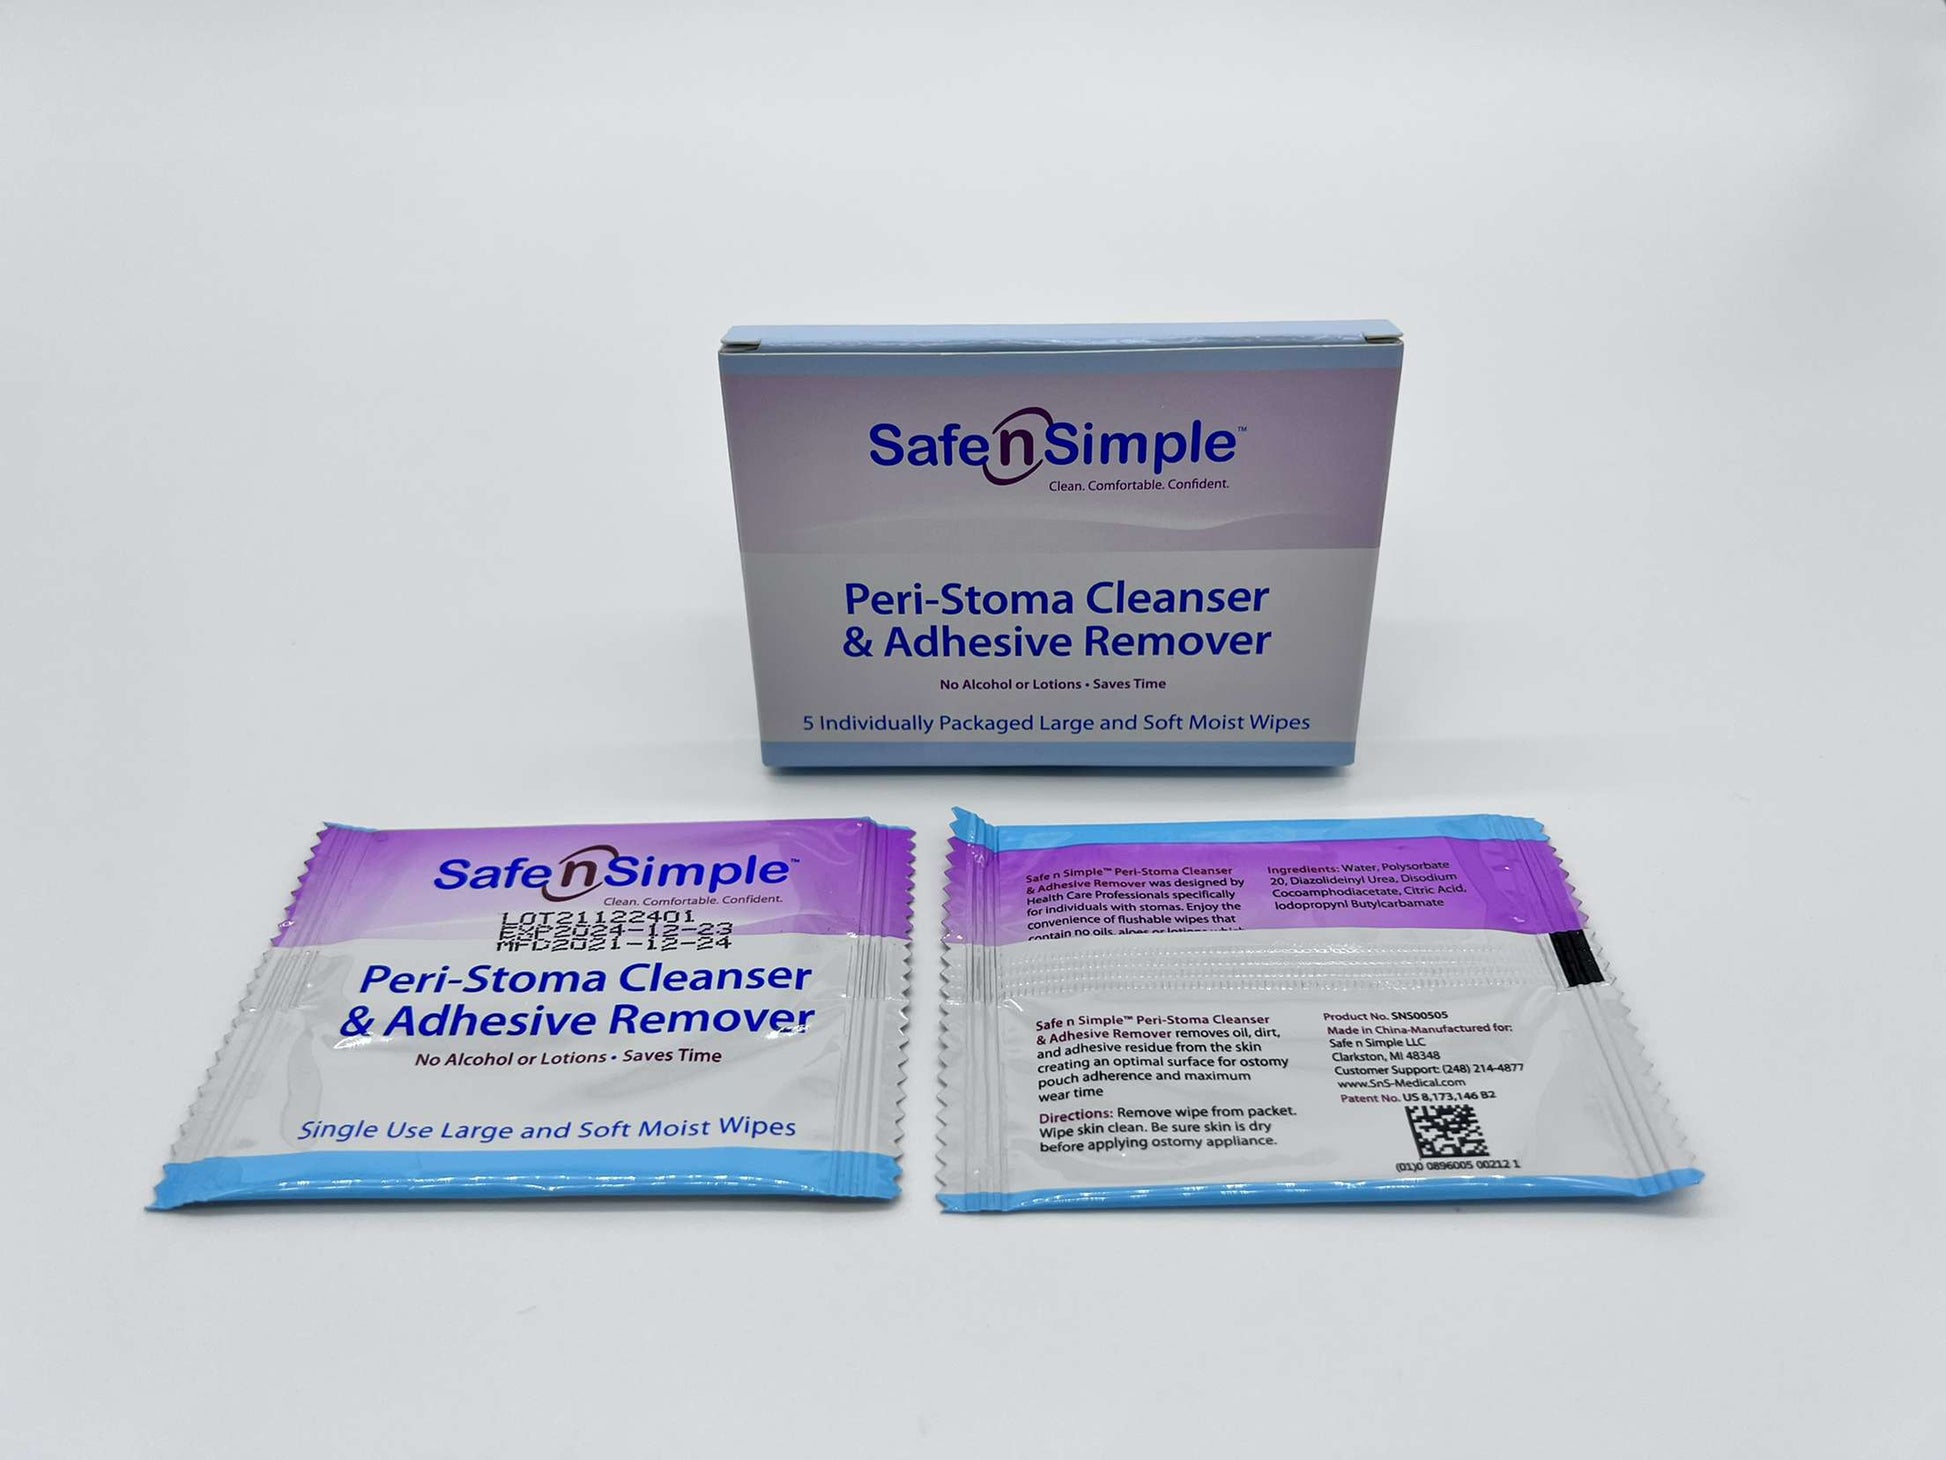 Ostomy Care Adhesive Remover Wipes